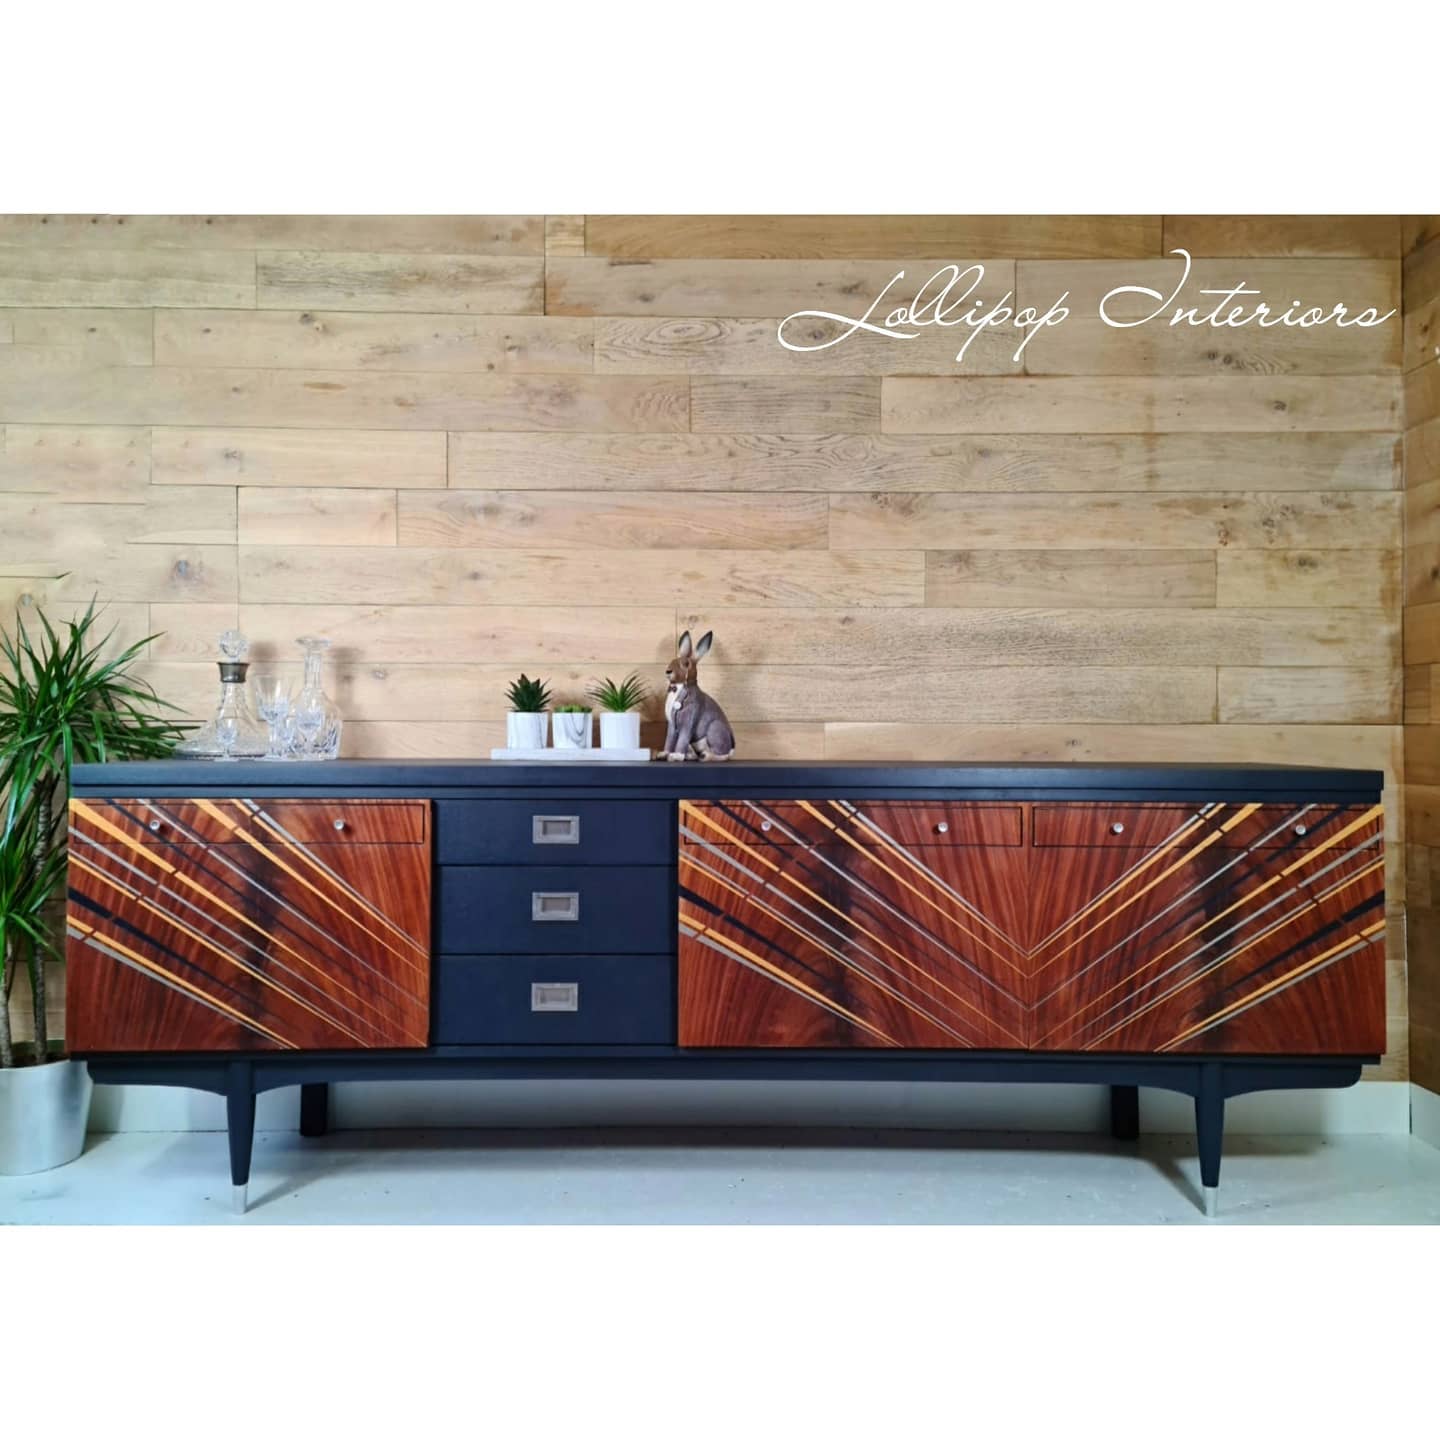 The House of Upcycling: Resurfaced Mid Century Sideboard from Lollipop Interiors